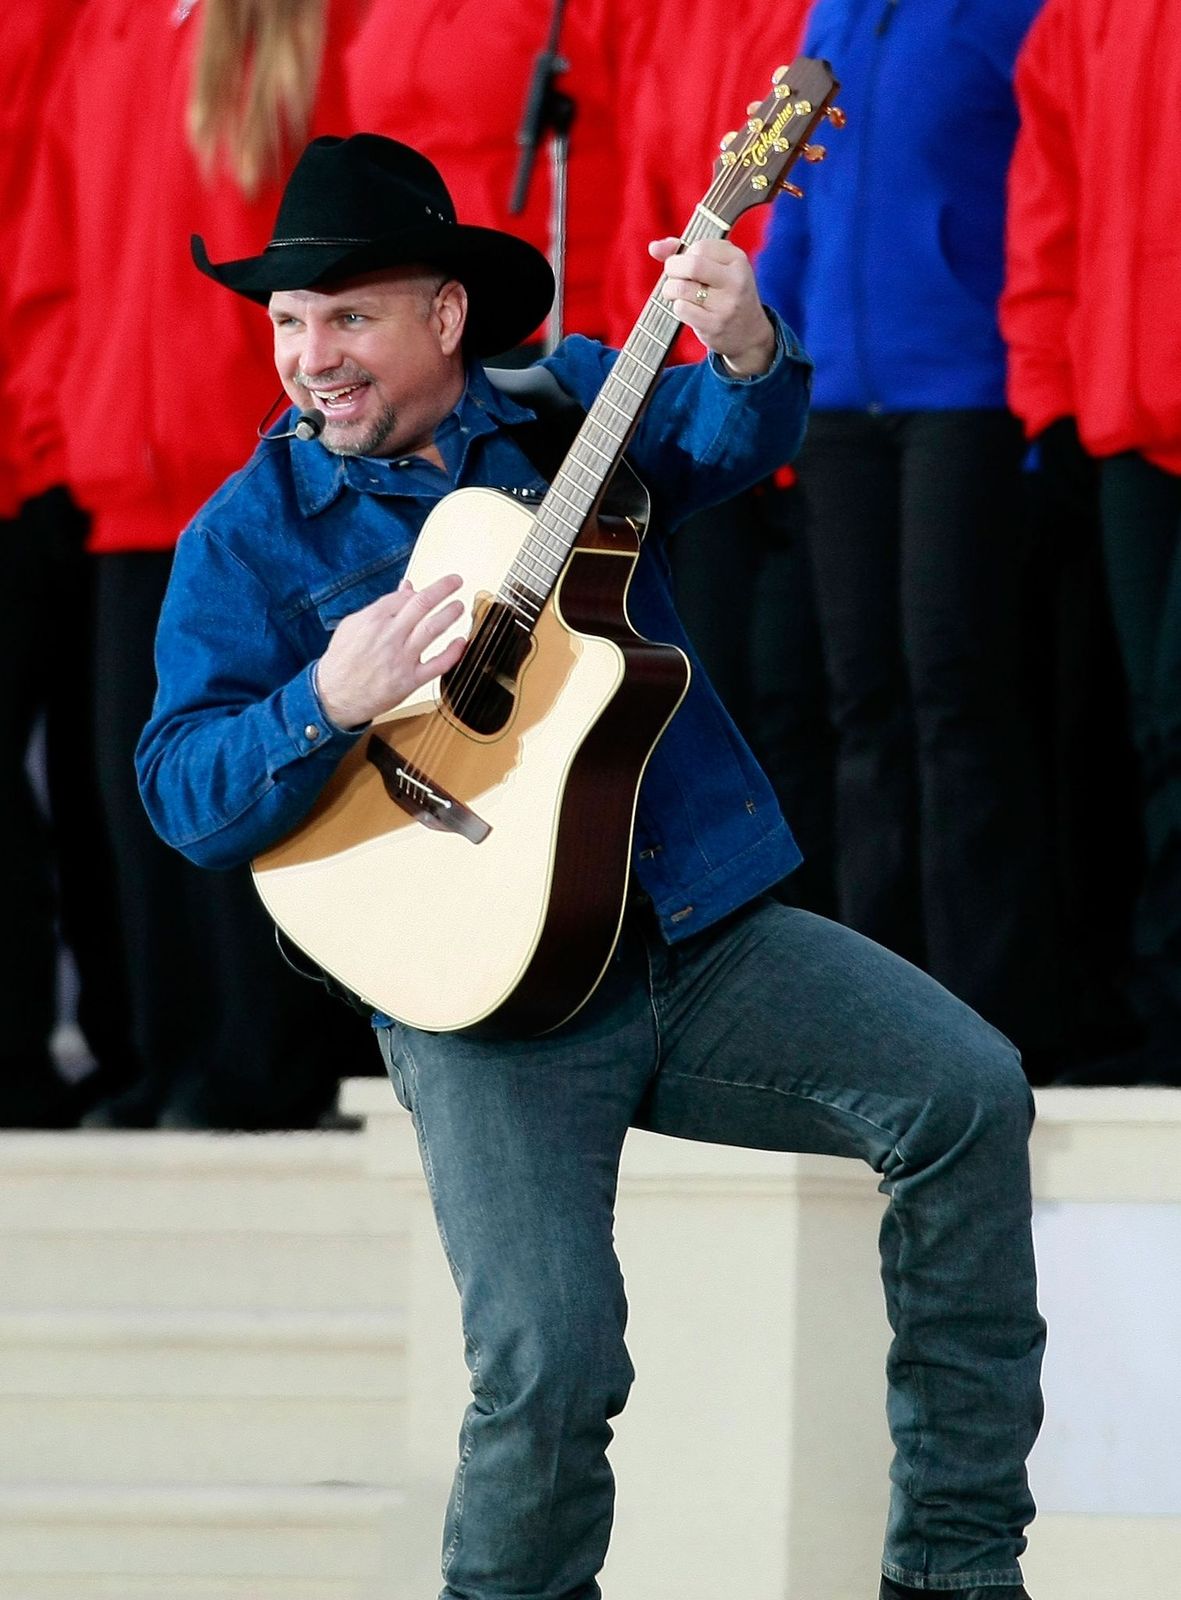 Garth Brooks at "We Are One: The Obama Inaugural Celebration At The Lincoln Memorial" on January 18, 2009 | Photo: Getty Images